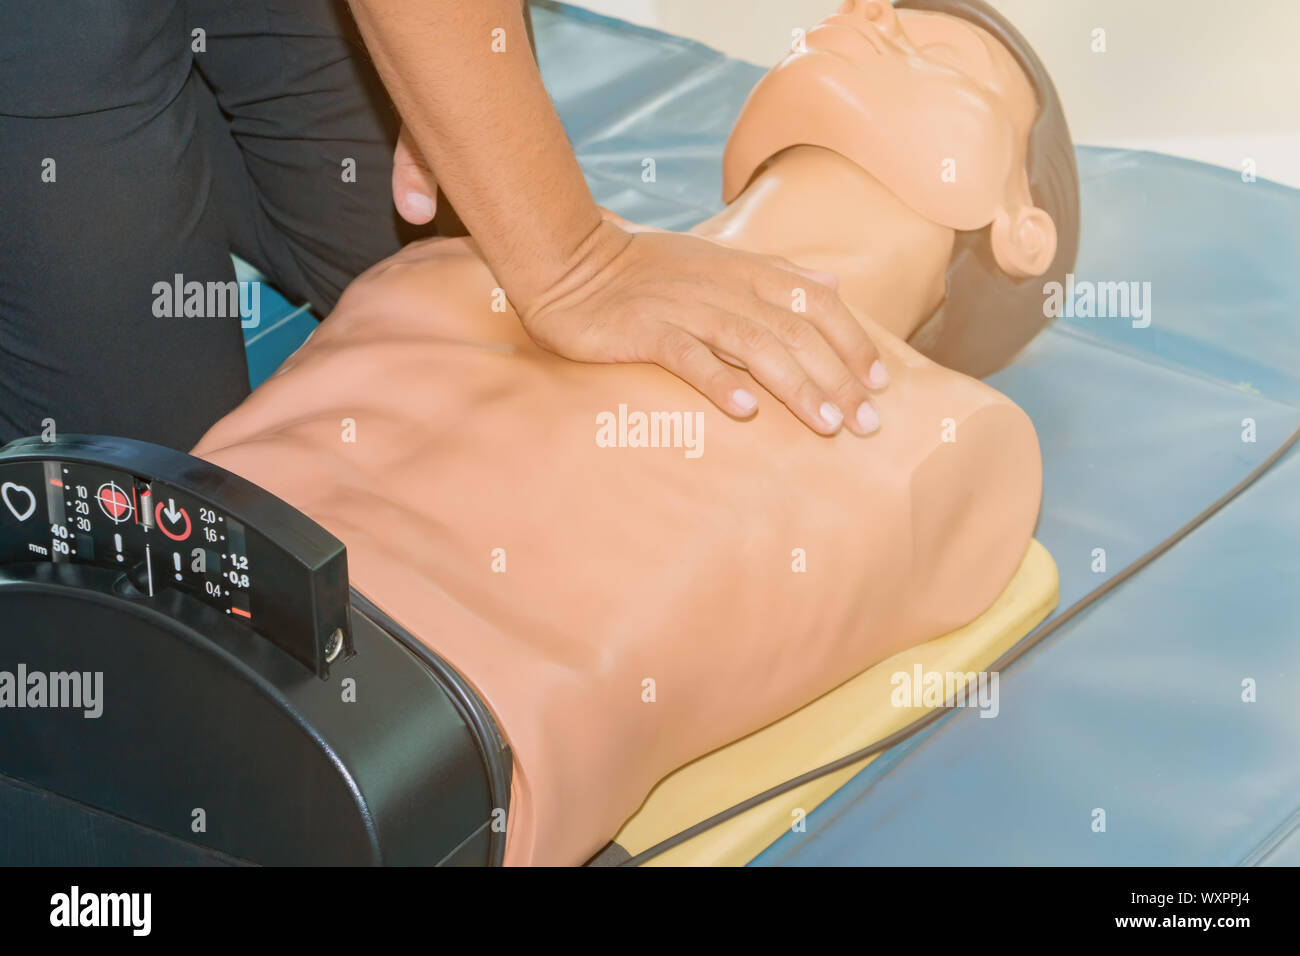 CPR aid dummy medical training with hand press Heart on doll emergency refresher training Concept closed-up. Stock Photo